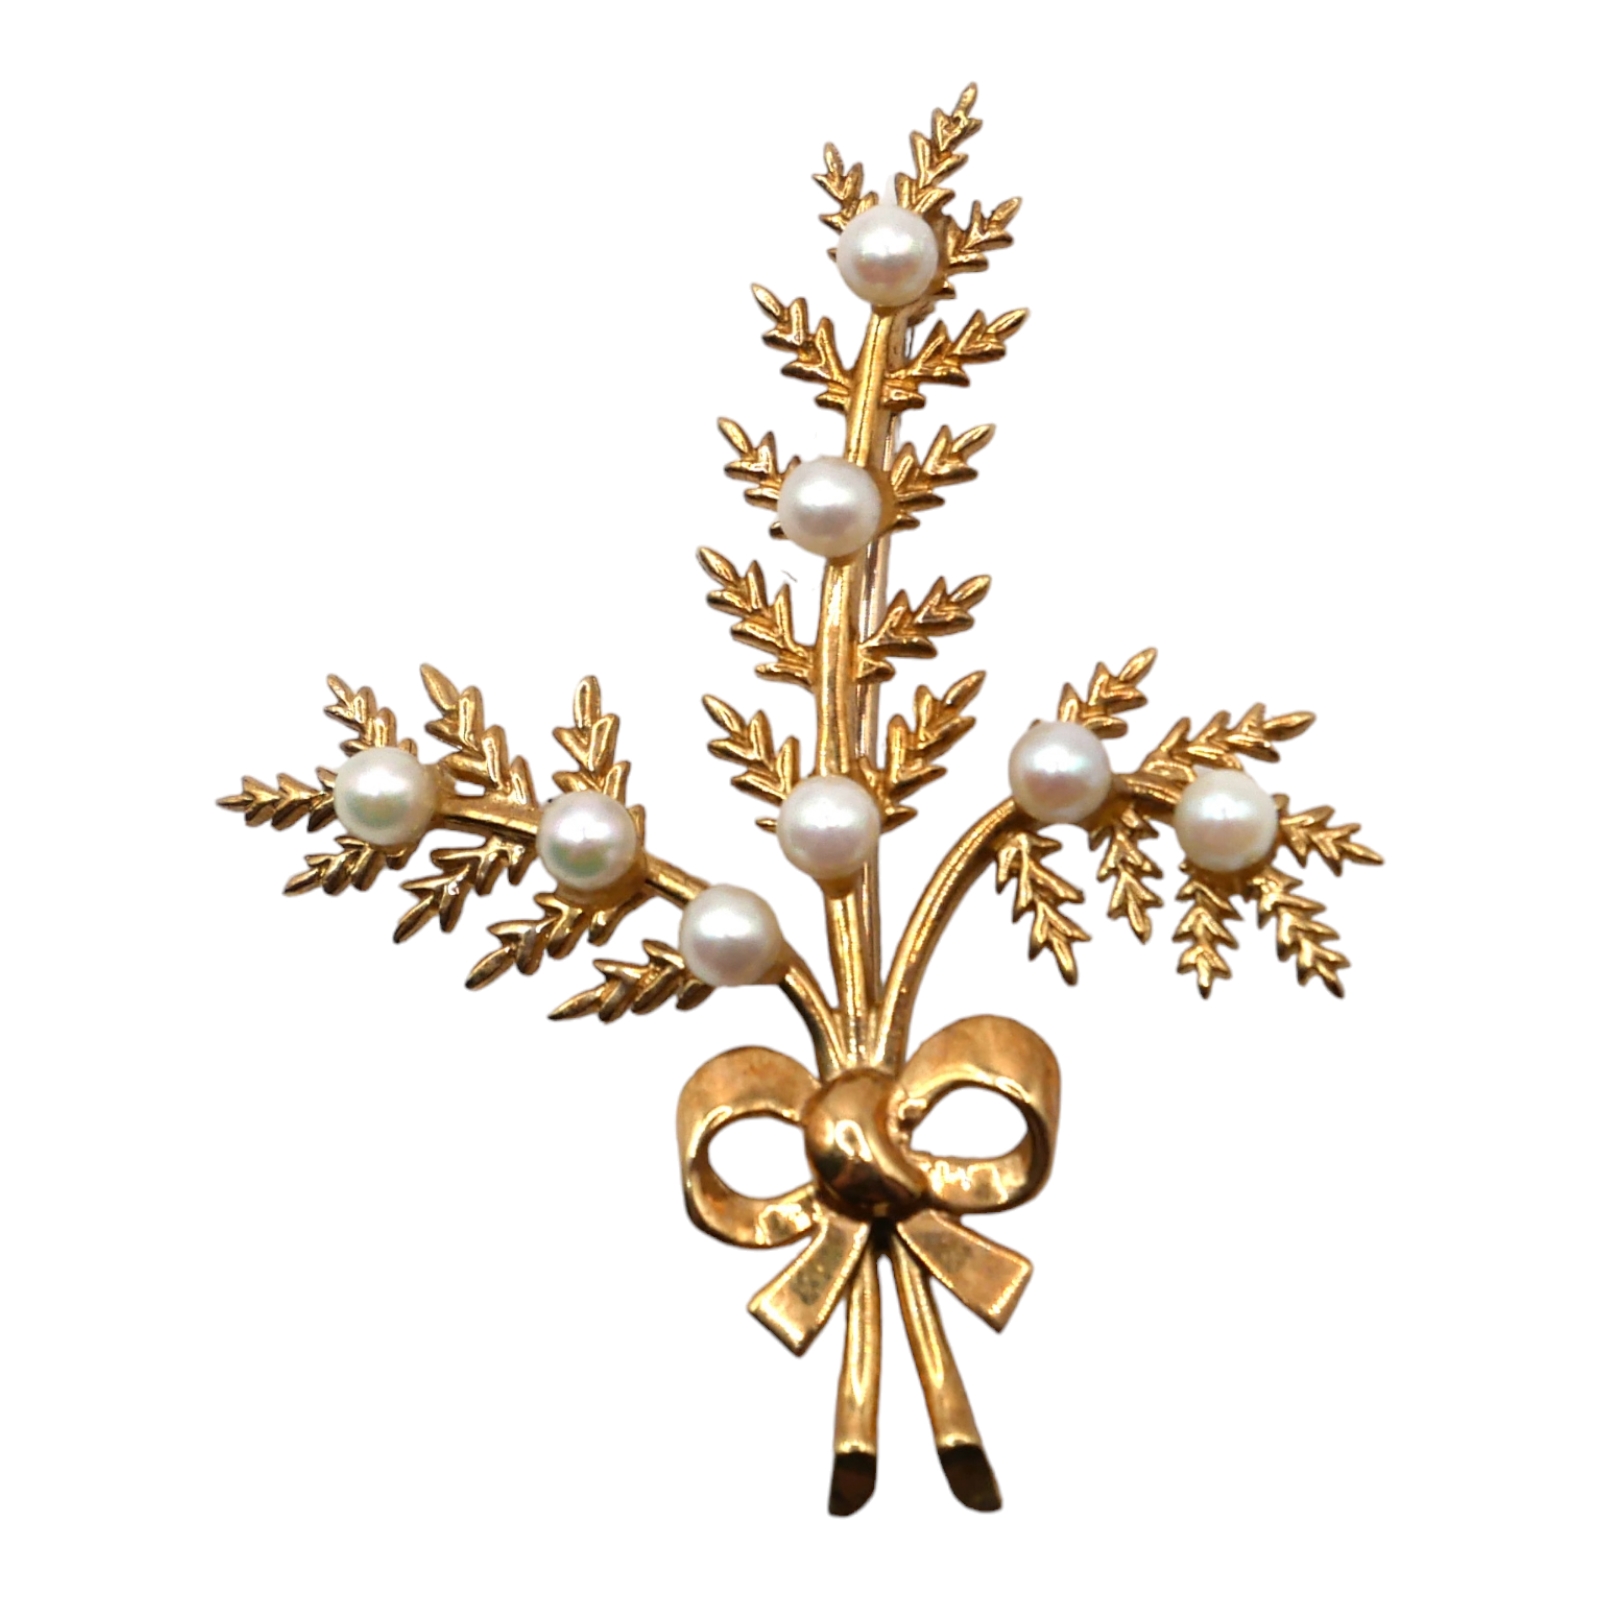 A 9CT GOLD AND PEARL BROOCH IN THE FORM OF A WHEATSHEAF Having stylised bow, chased leaves and eight